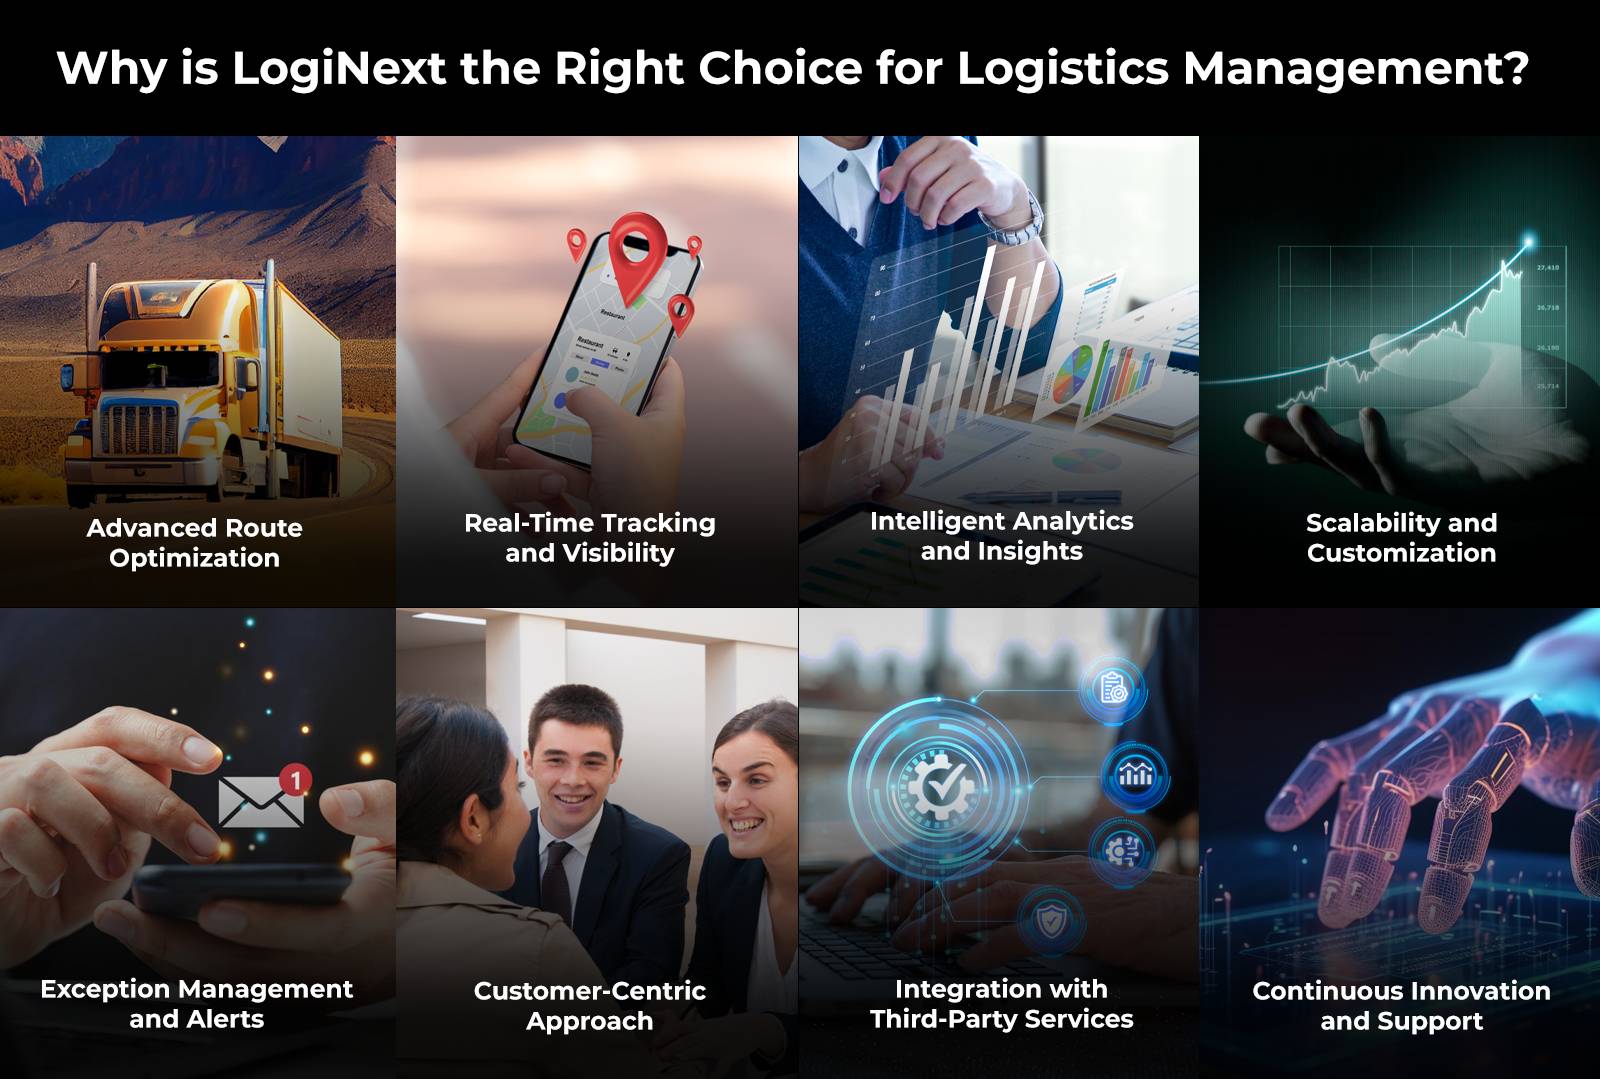 Why is LogiNext the right choice for Logistics Management?